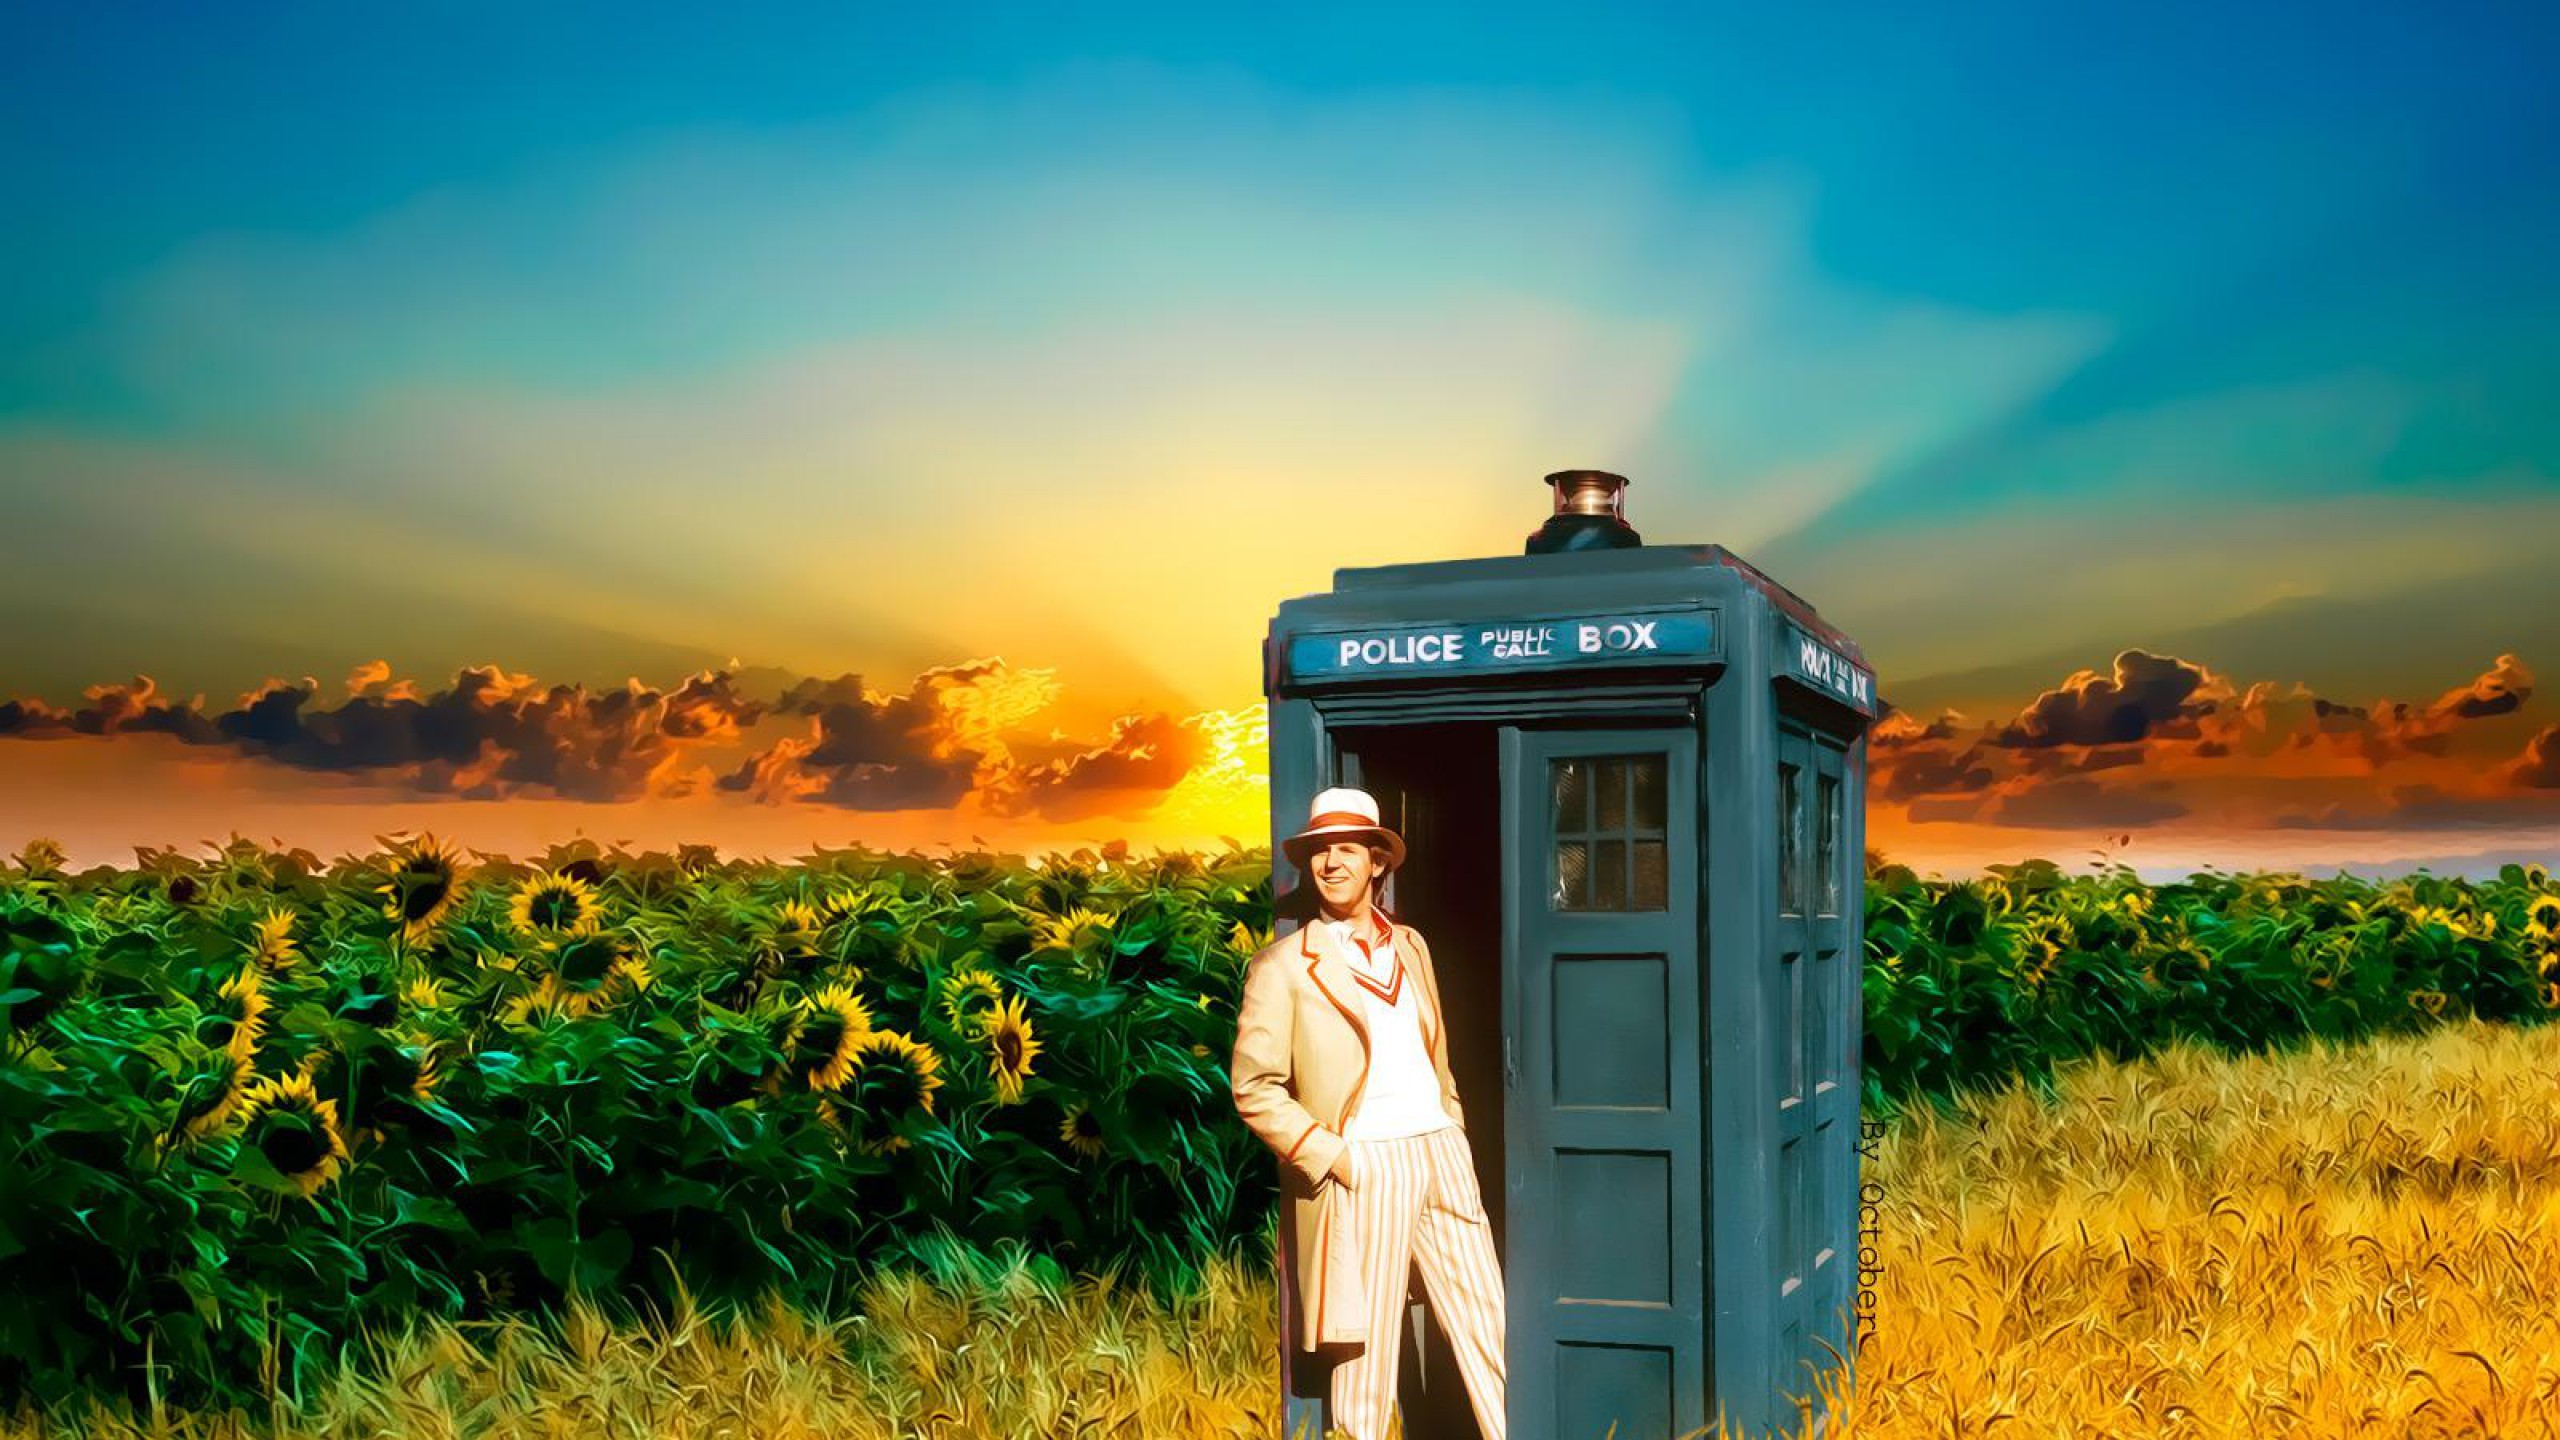 2560x1440 dr who Computer Wallpapers, Desktop Backgrounds